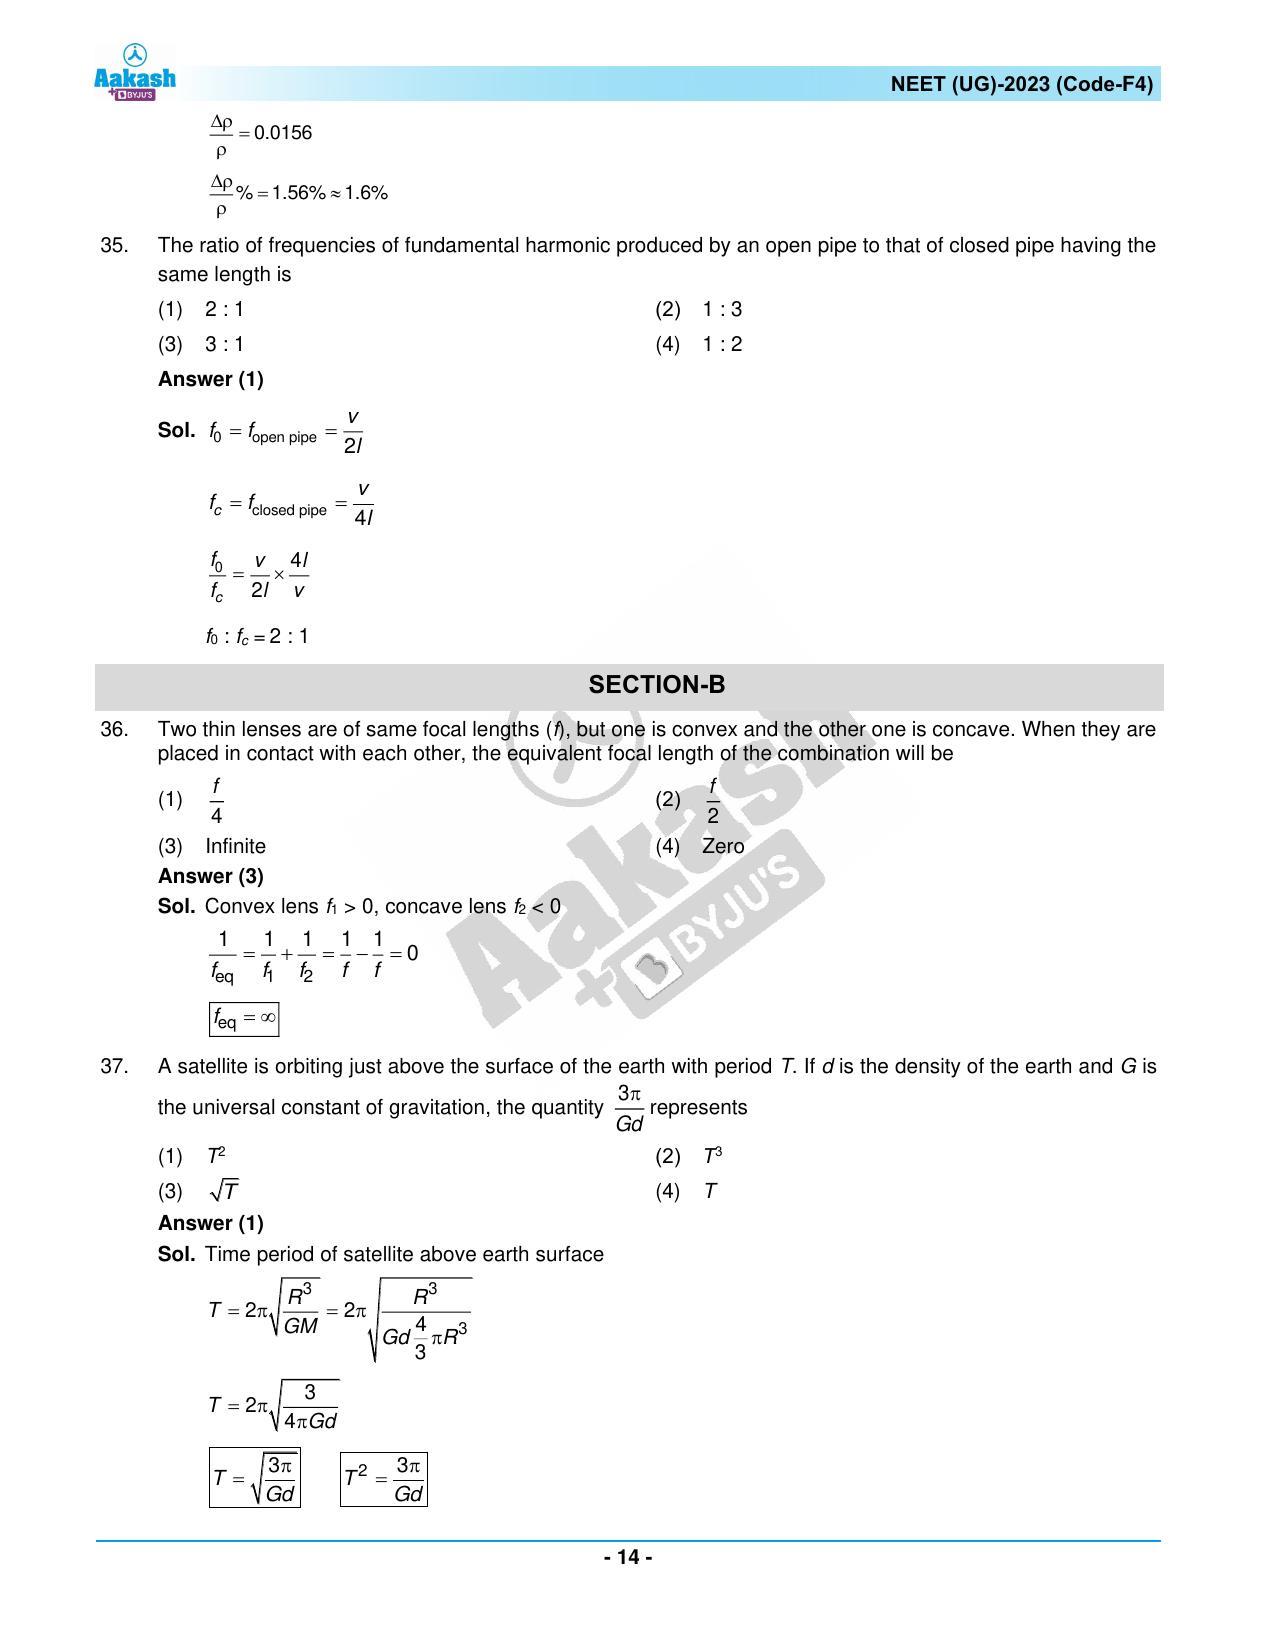 NEET 2023 Question Paper F4 - Page 14